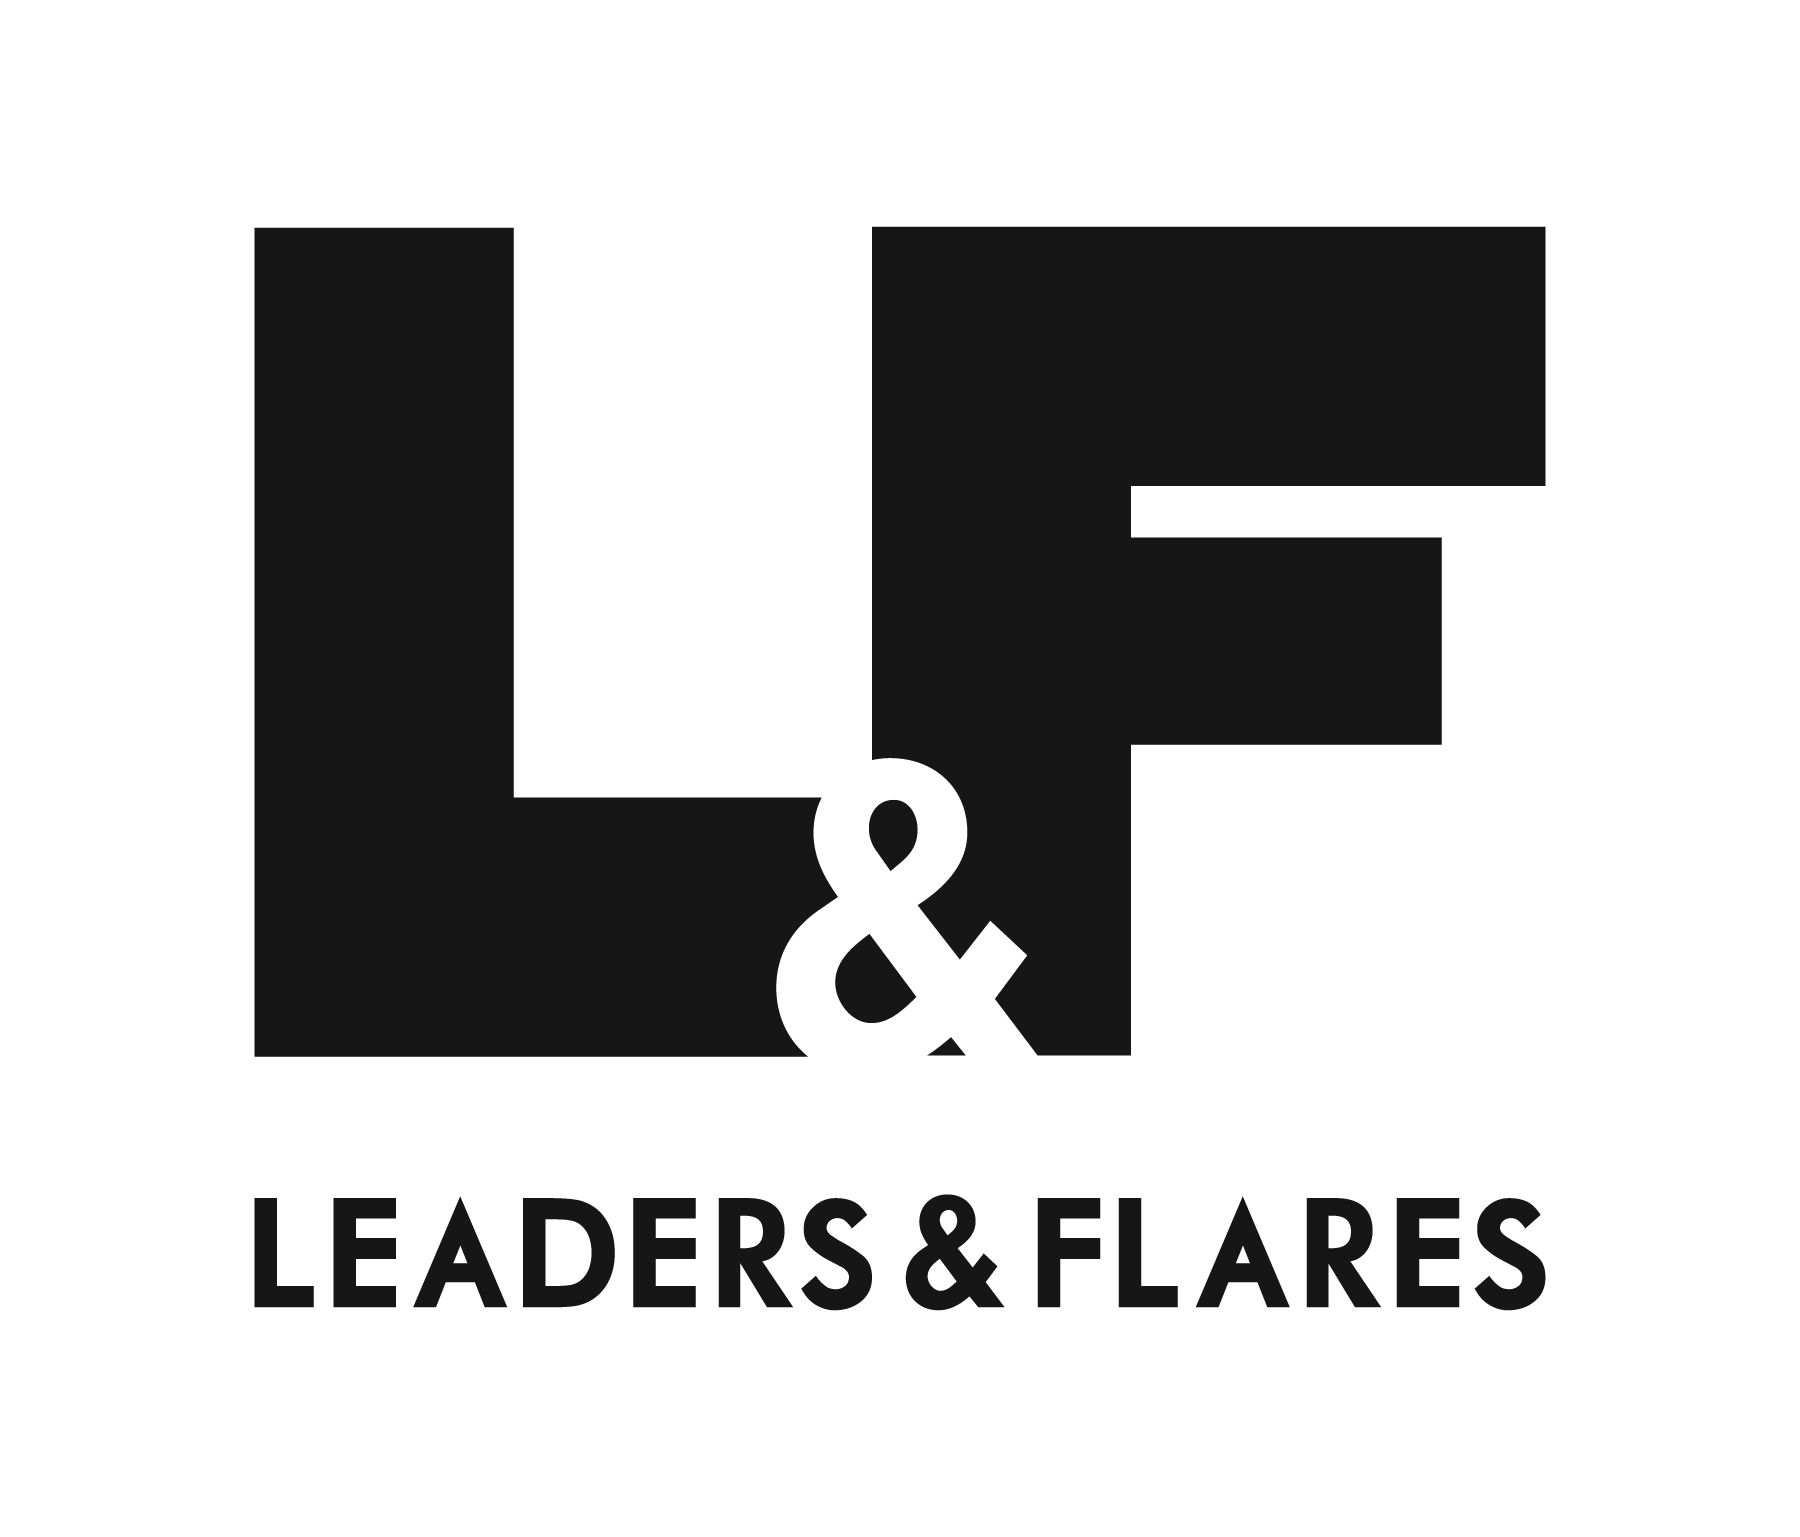 Leaders and Flares a film production studio